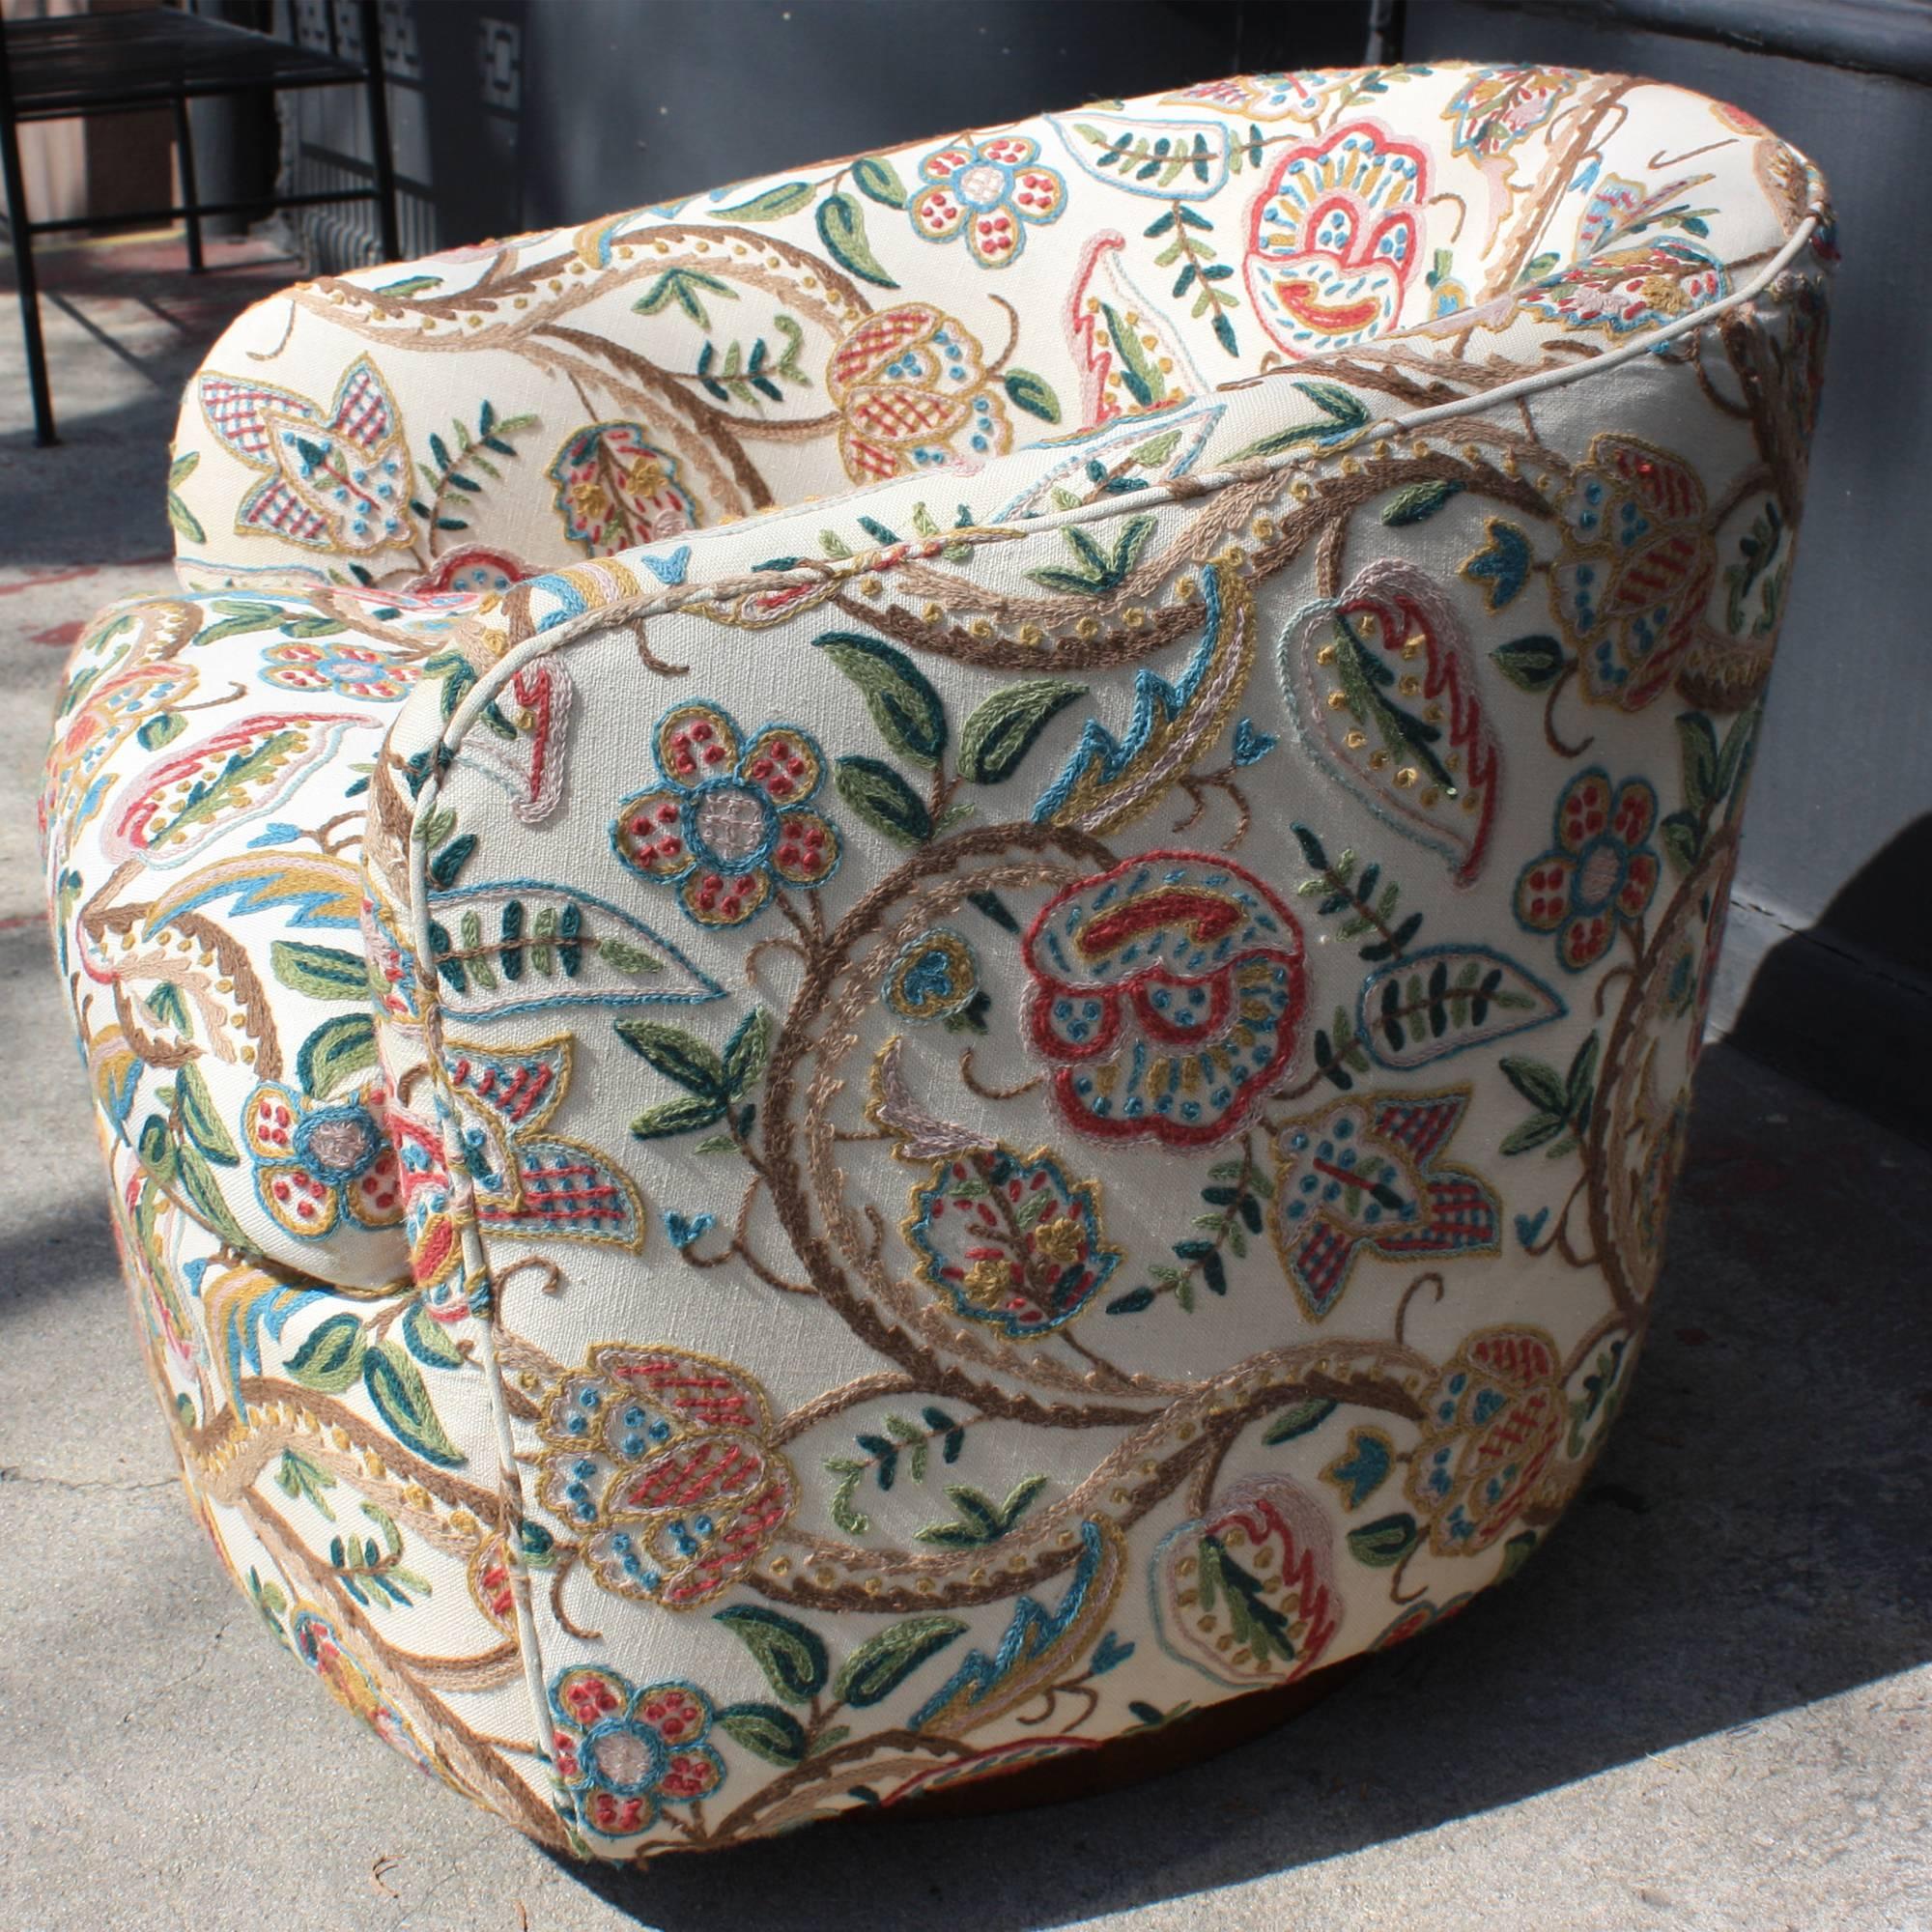 This Milo Baughman for Thayer Coggin barrel back swivel chair features the signature walnut swivel / tilt base. The seat was recovered in a spectacular vintage crewel embroidery fabric (which has recently been professionally cleaned). The fabric